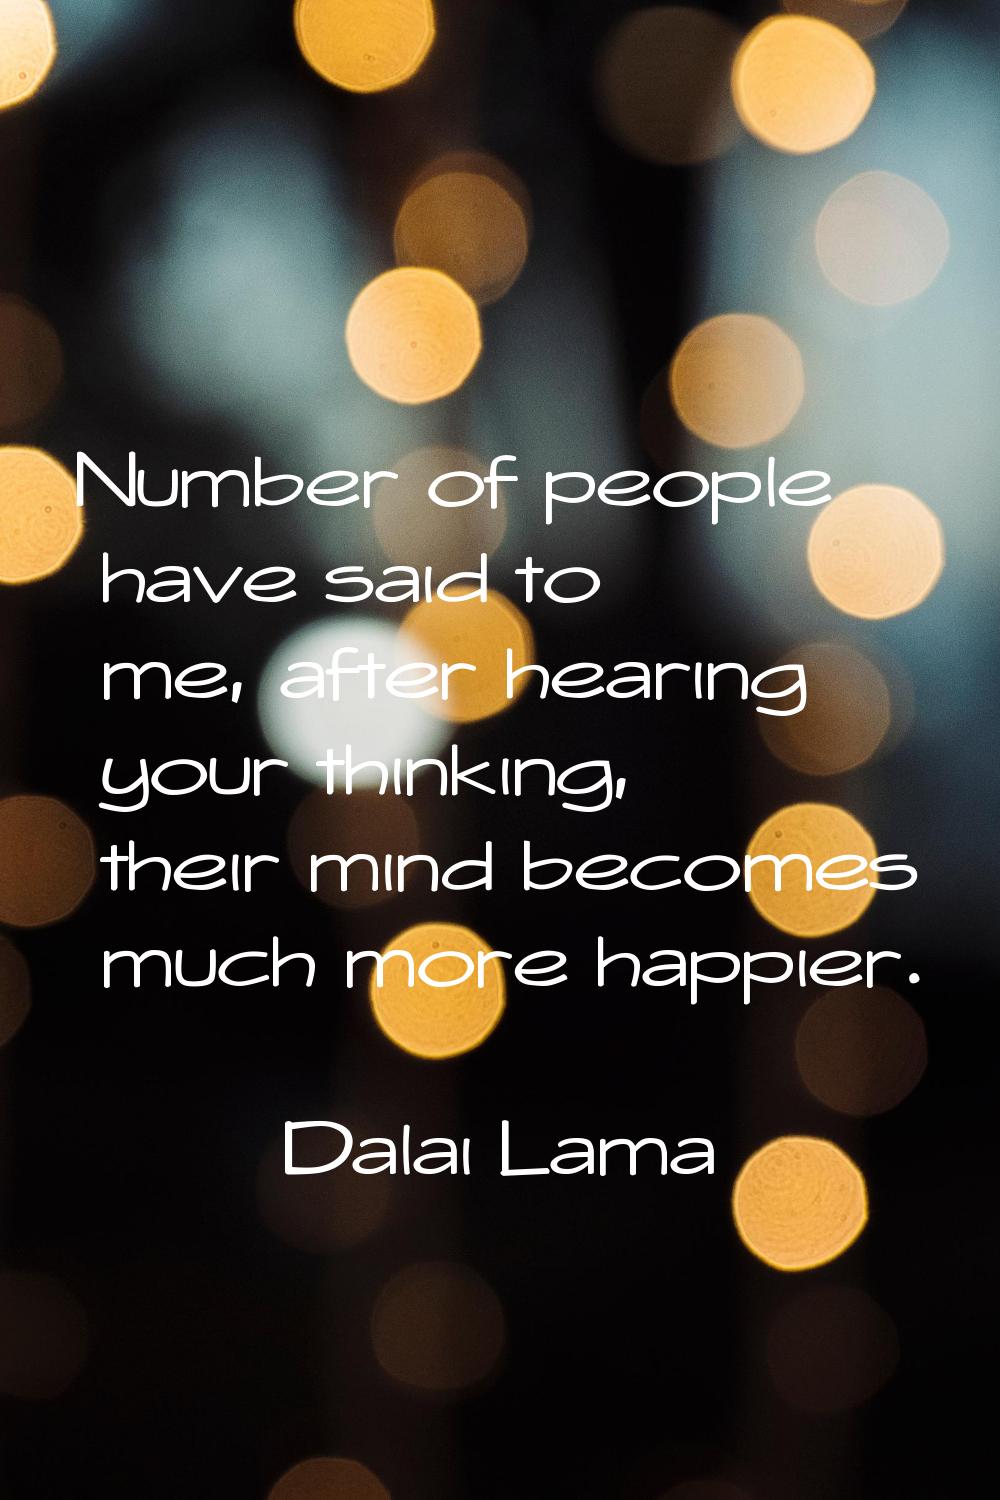 Number of people have said to me, after hearing your thinking, their mind becomes much more happier